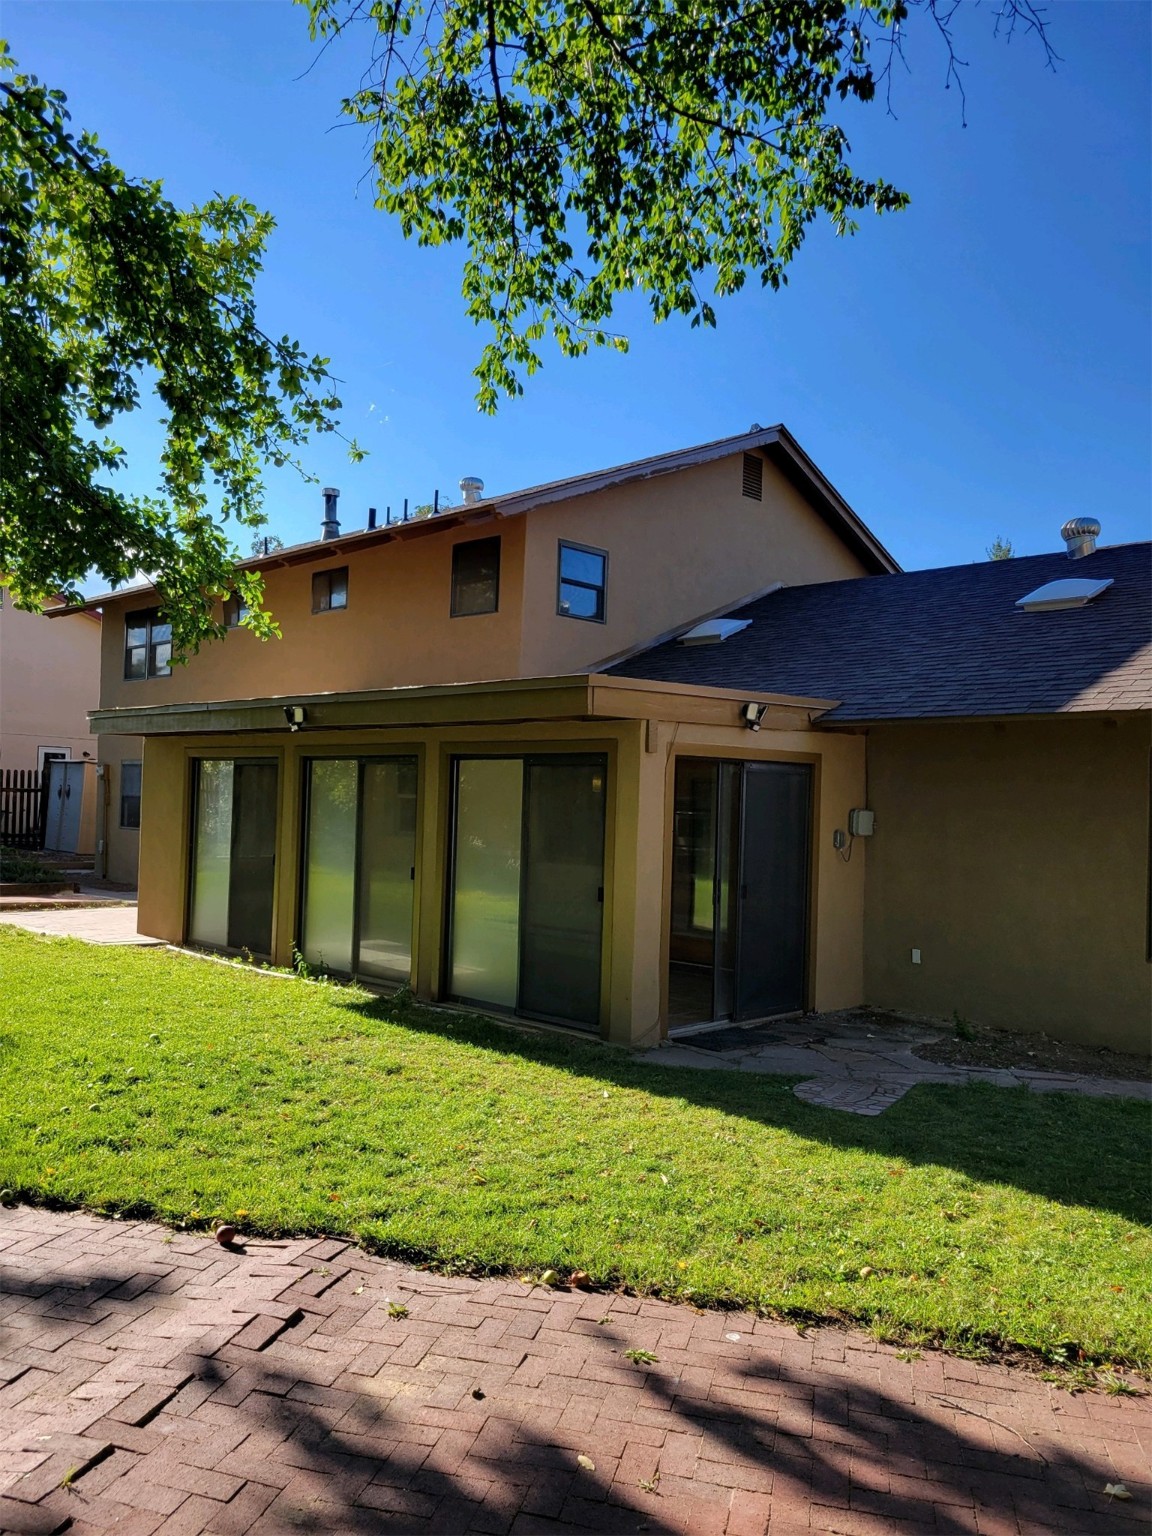 455 Bryce Ave, Los Alamos, New Mexico 87547, 5 Bedrooms Bedrooms, ,3 BathroomsBathrooms,Residential,For Sale,455 Bryce Ave,202232769